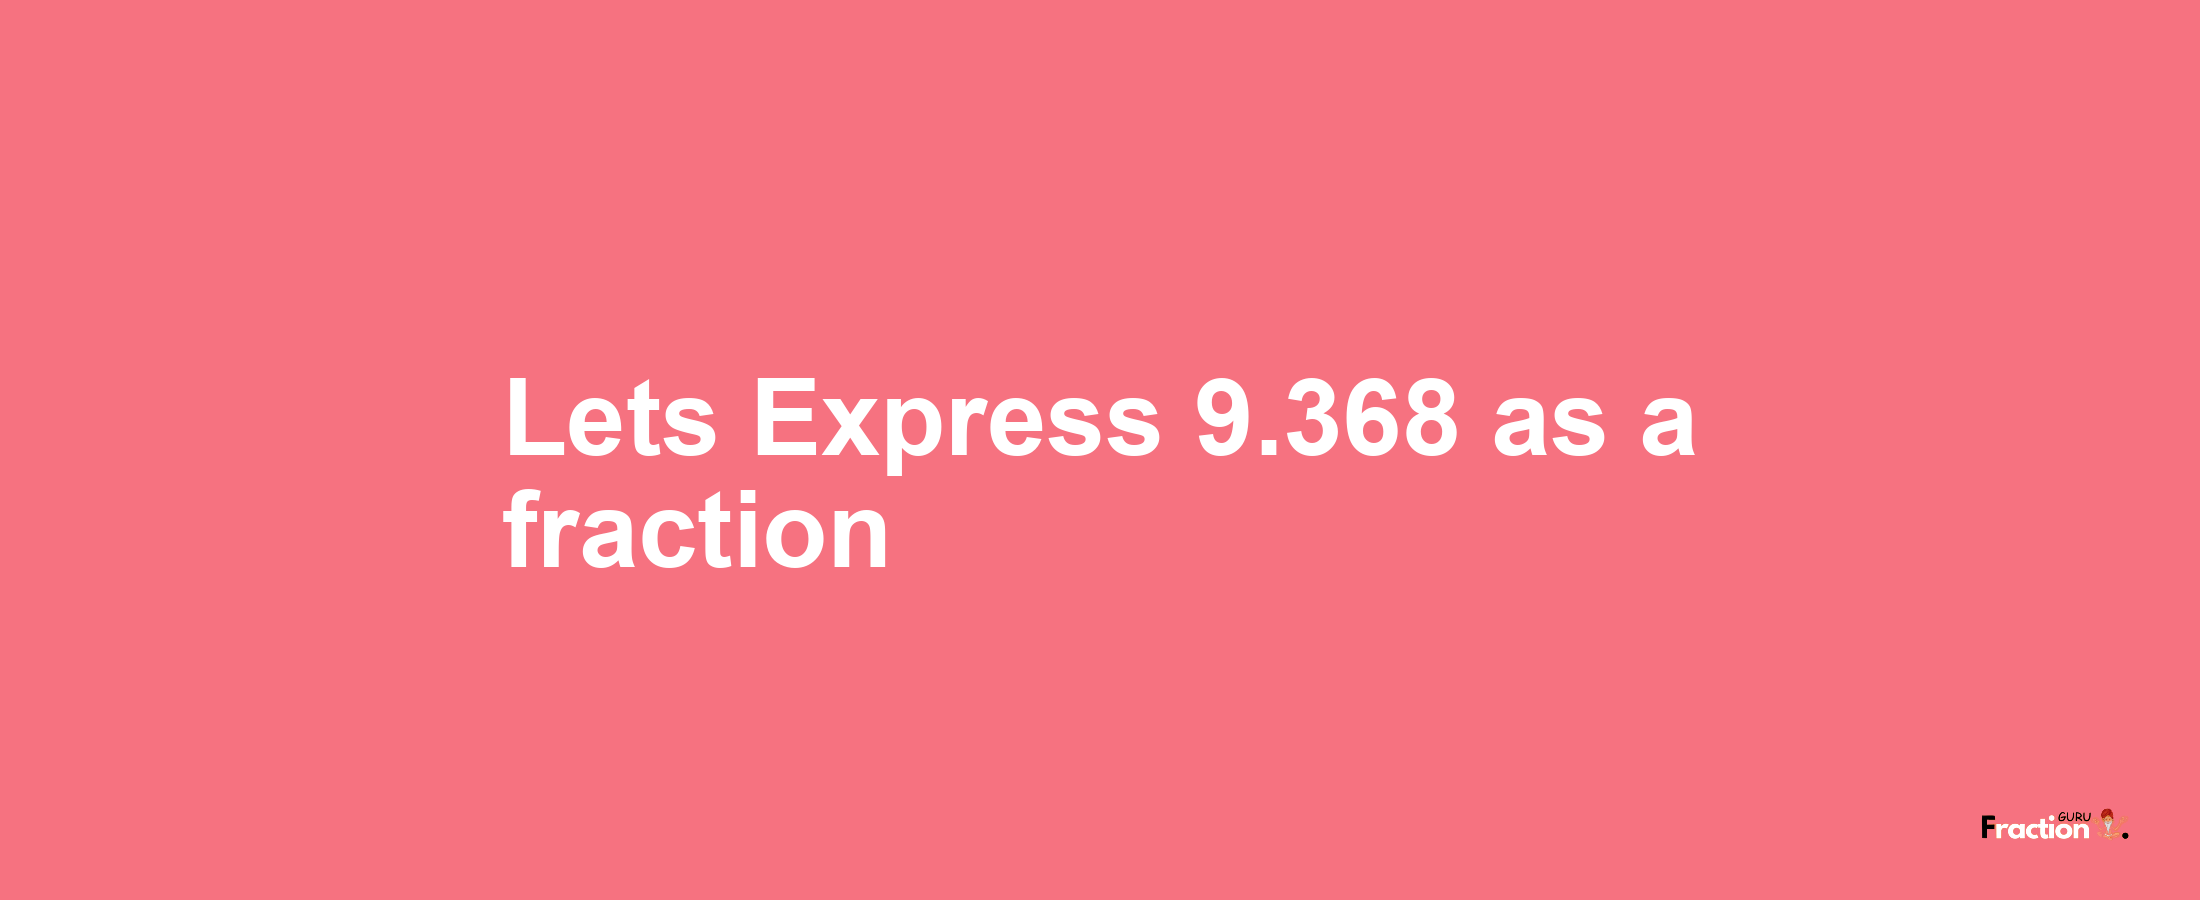 Lets Express 9.368 as afraction